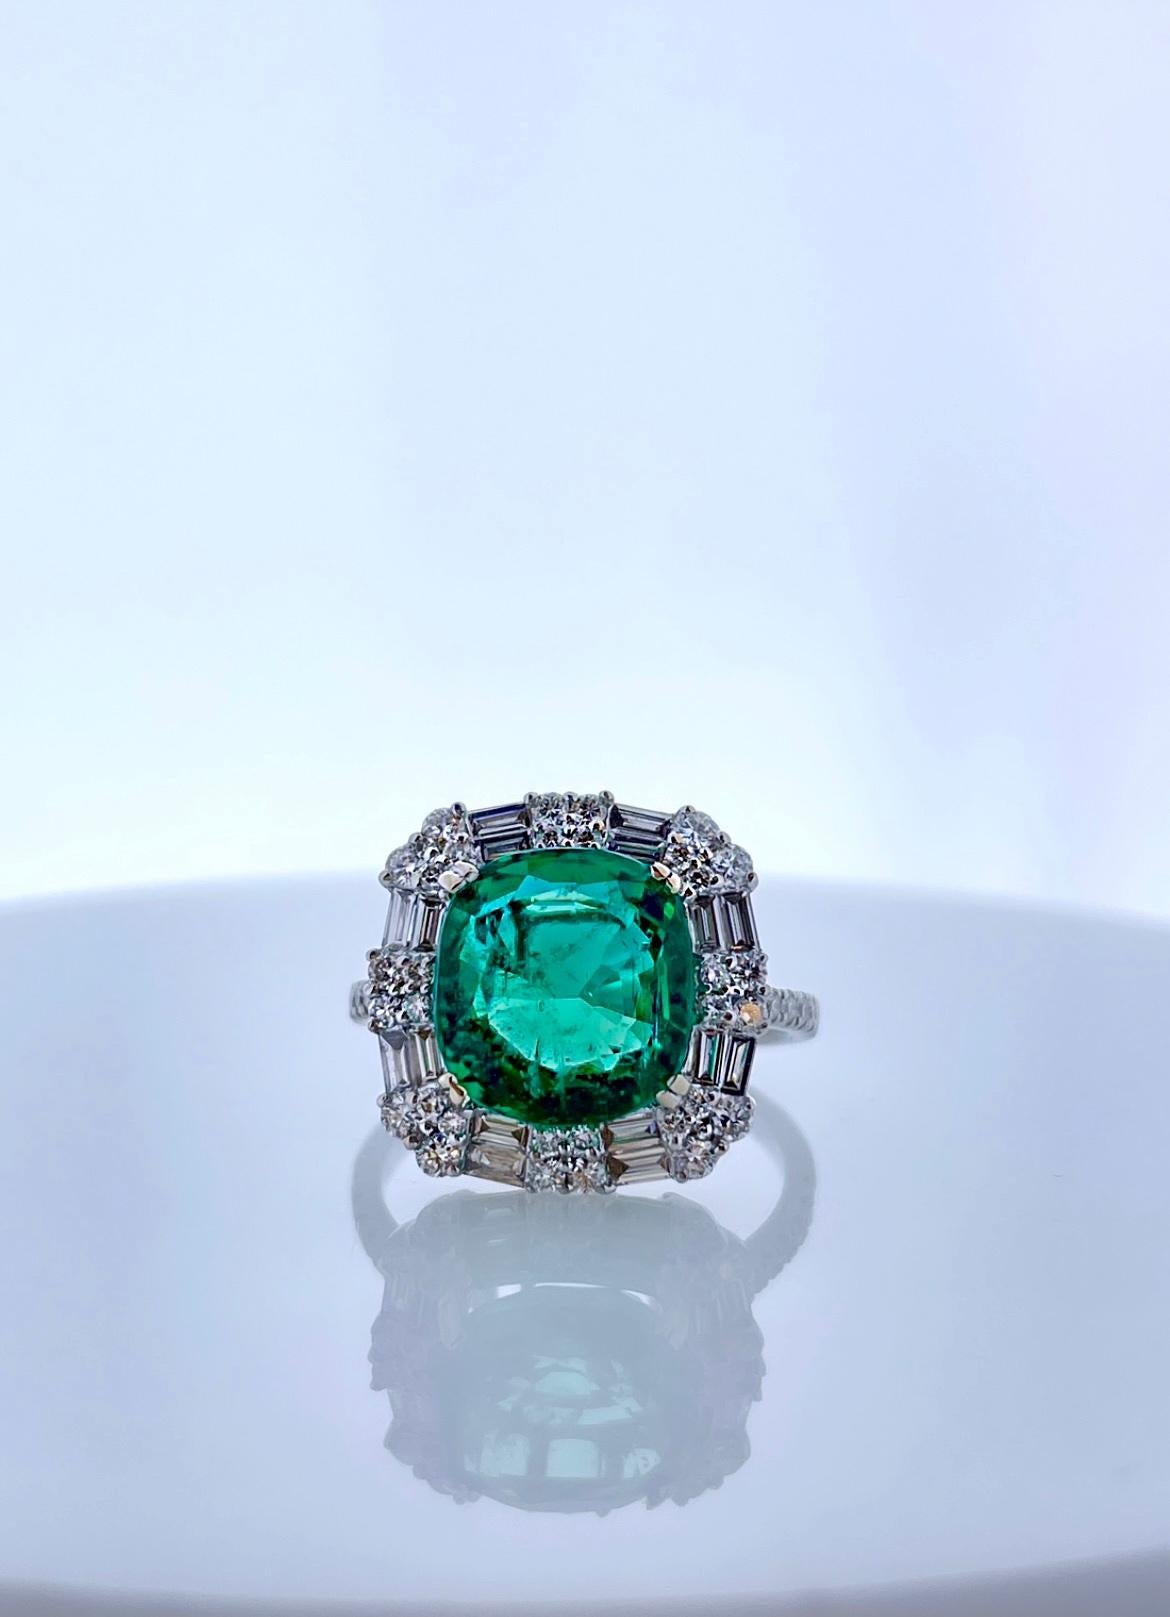 This is a 4.06CT cushion cut intense green emerald. The gem source is Colombia; its color is vibrant grass green. Its transparency and luster are excellent. Sparkling mixed cut diamonds frame this gem in a halo cluster and down the sides of the slim